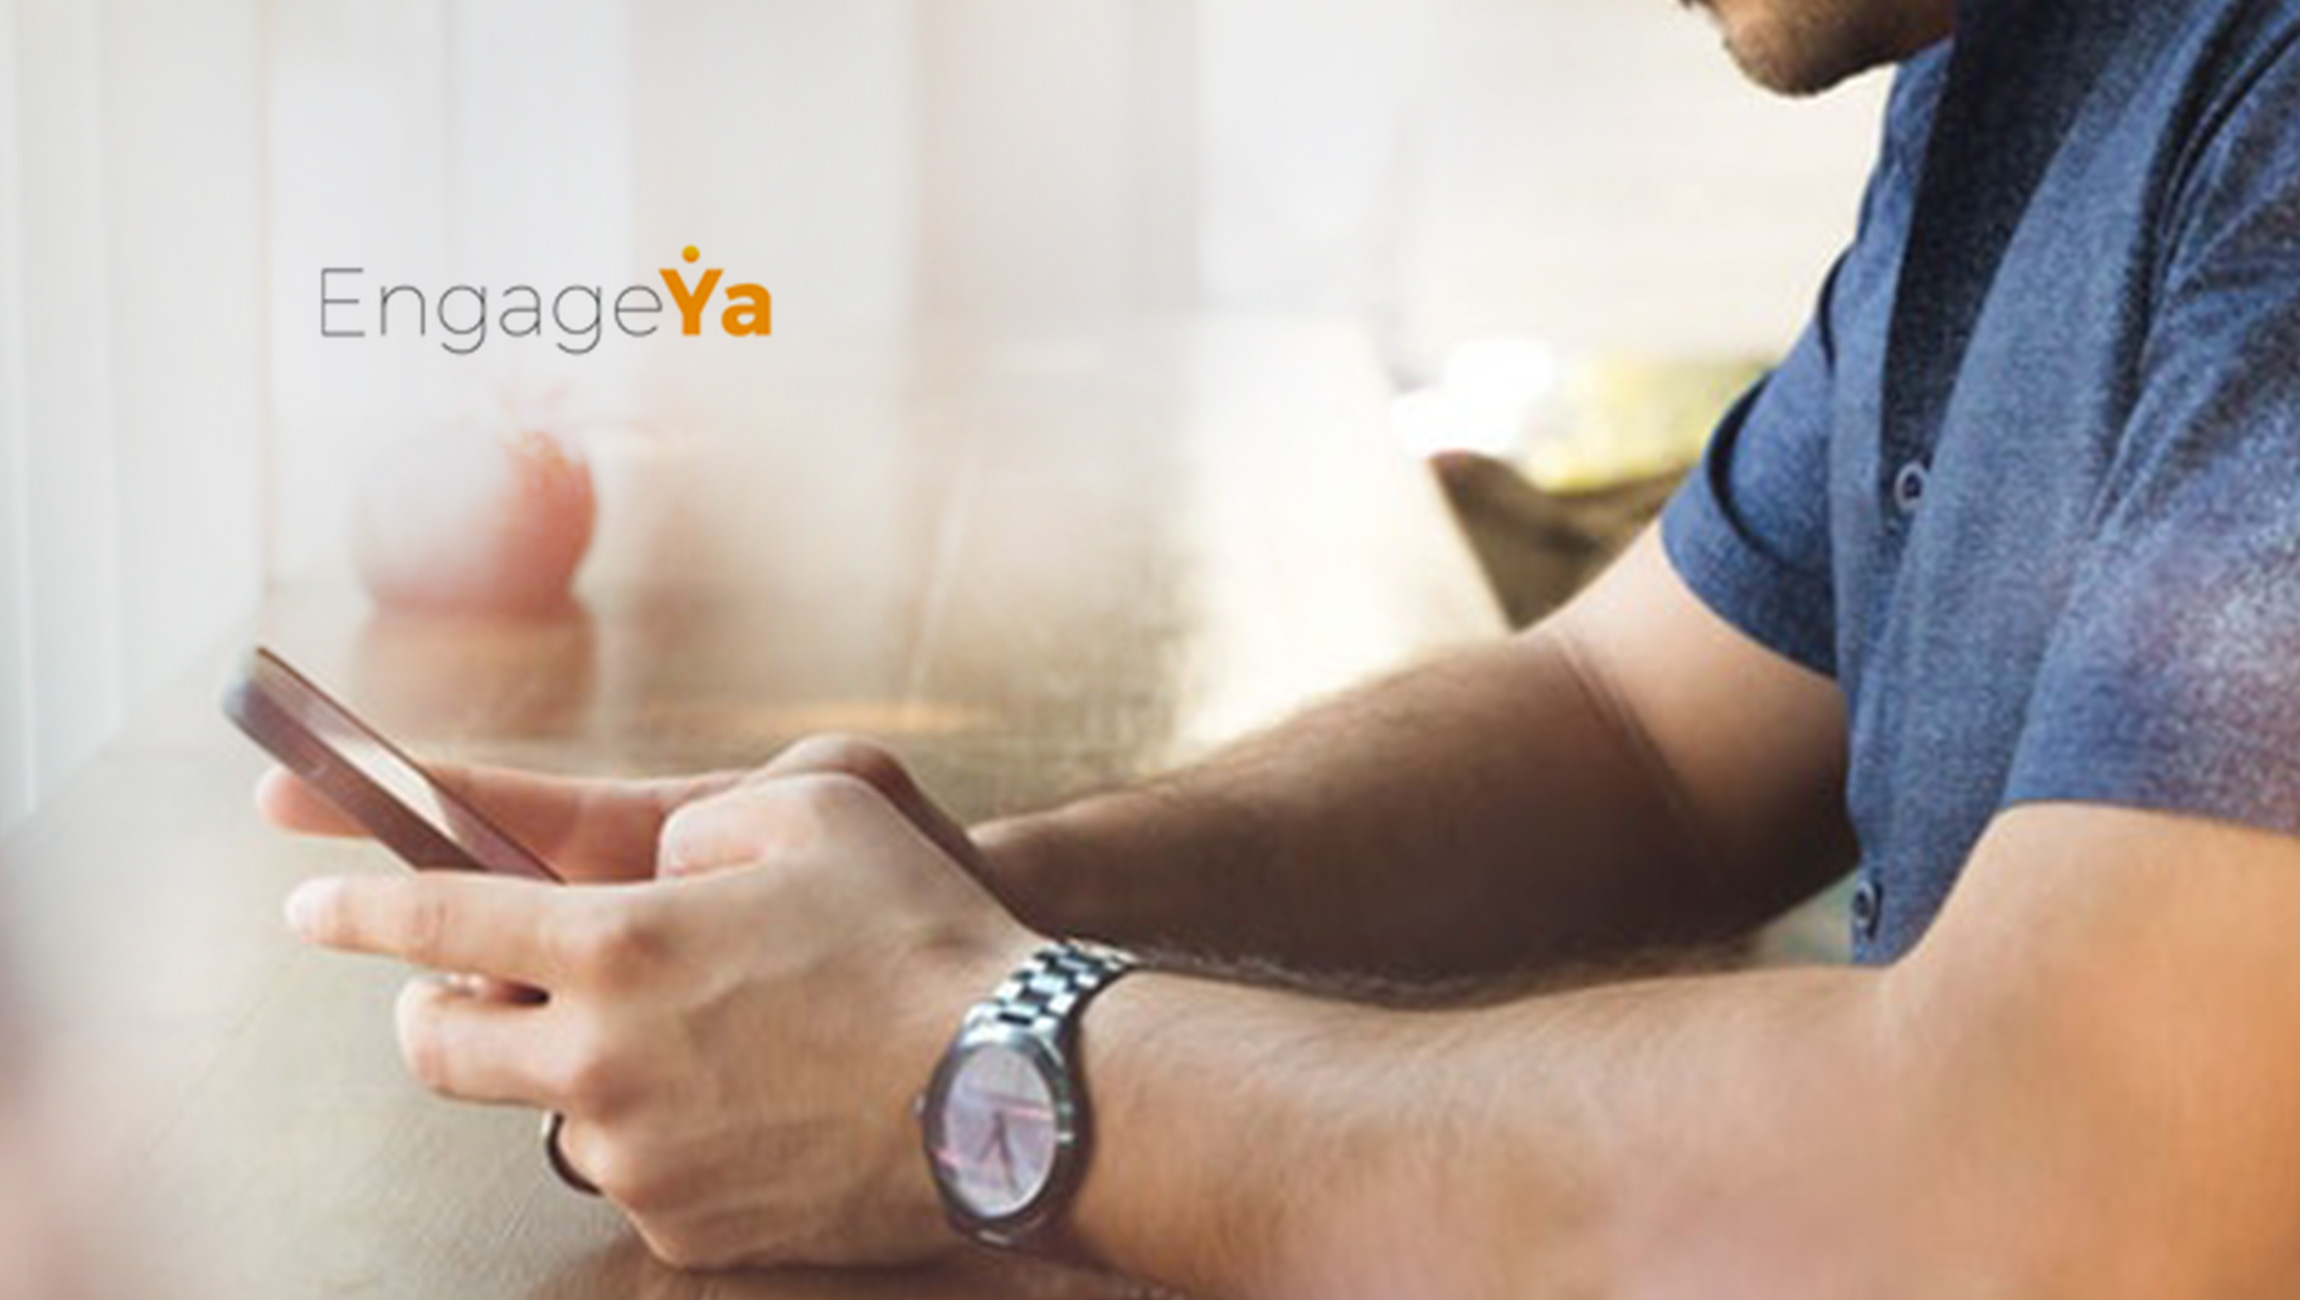 Engageya Launches "Stories" Unit For Mobile Publishers